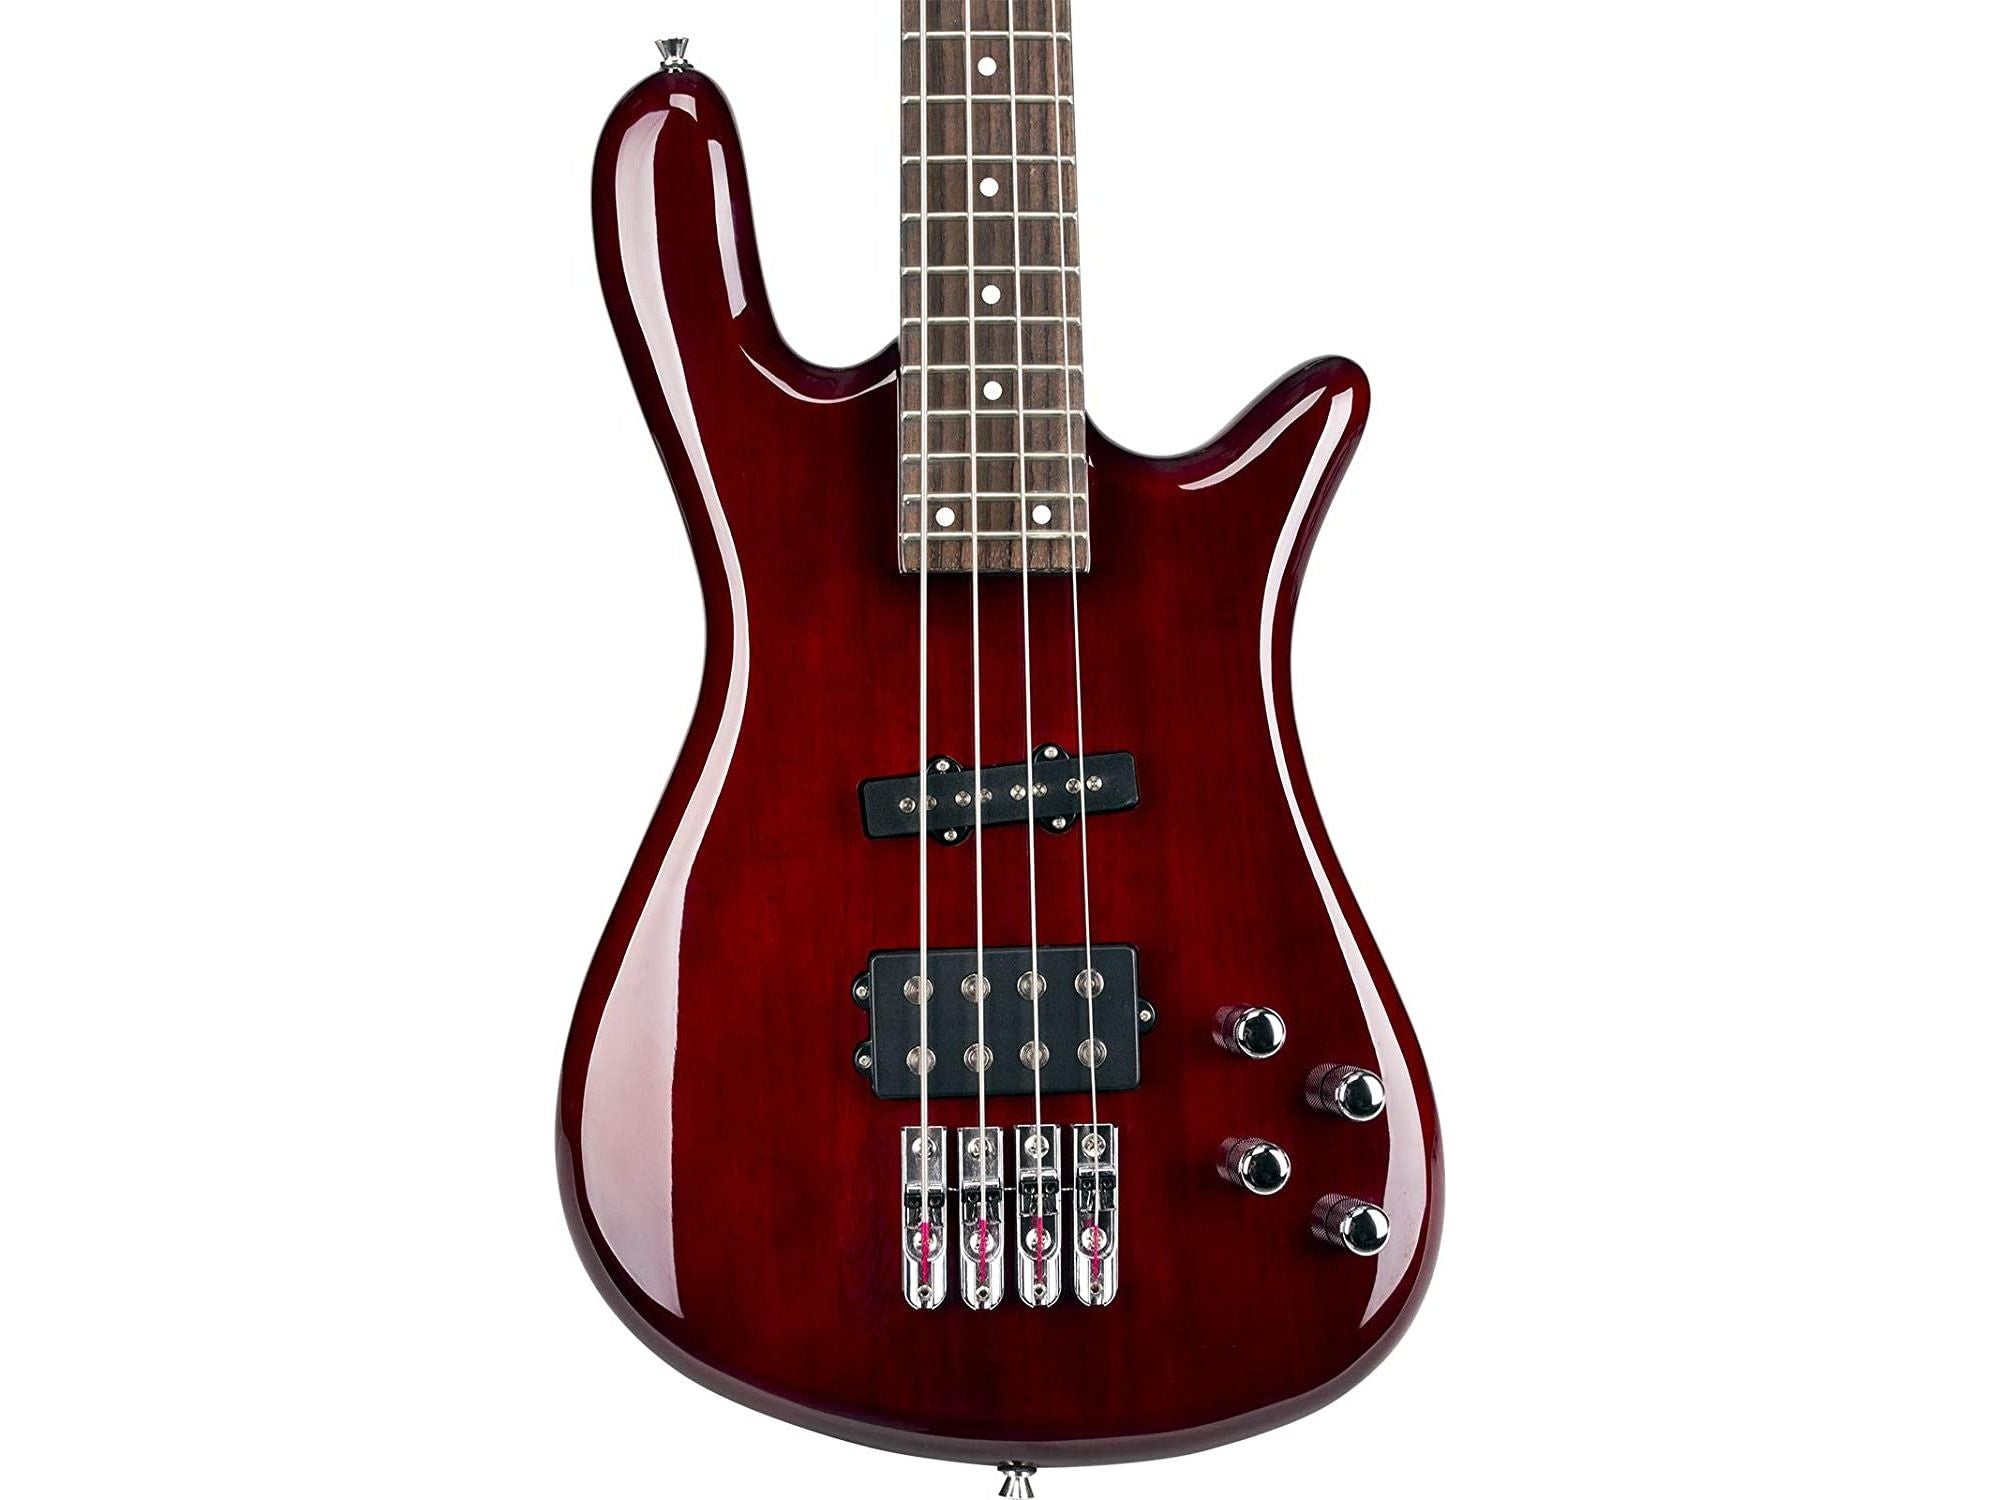 SX Electric Bass Guitar Arched Body in Wine Red Finish